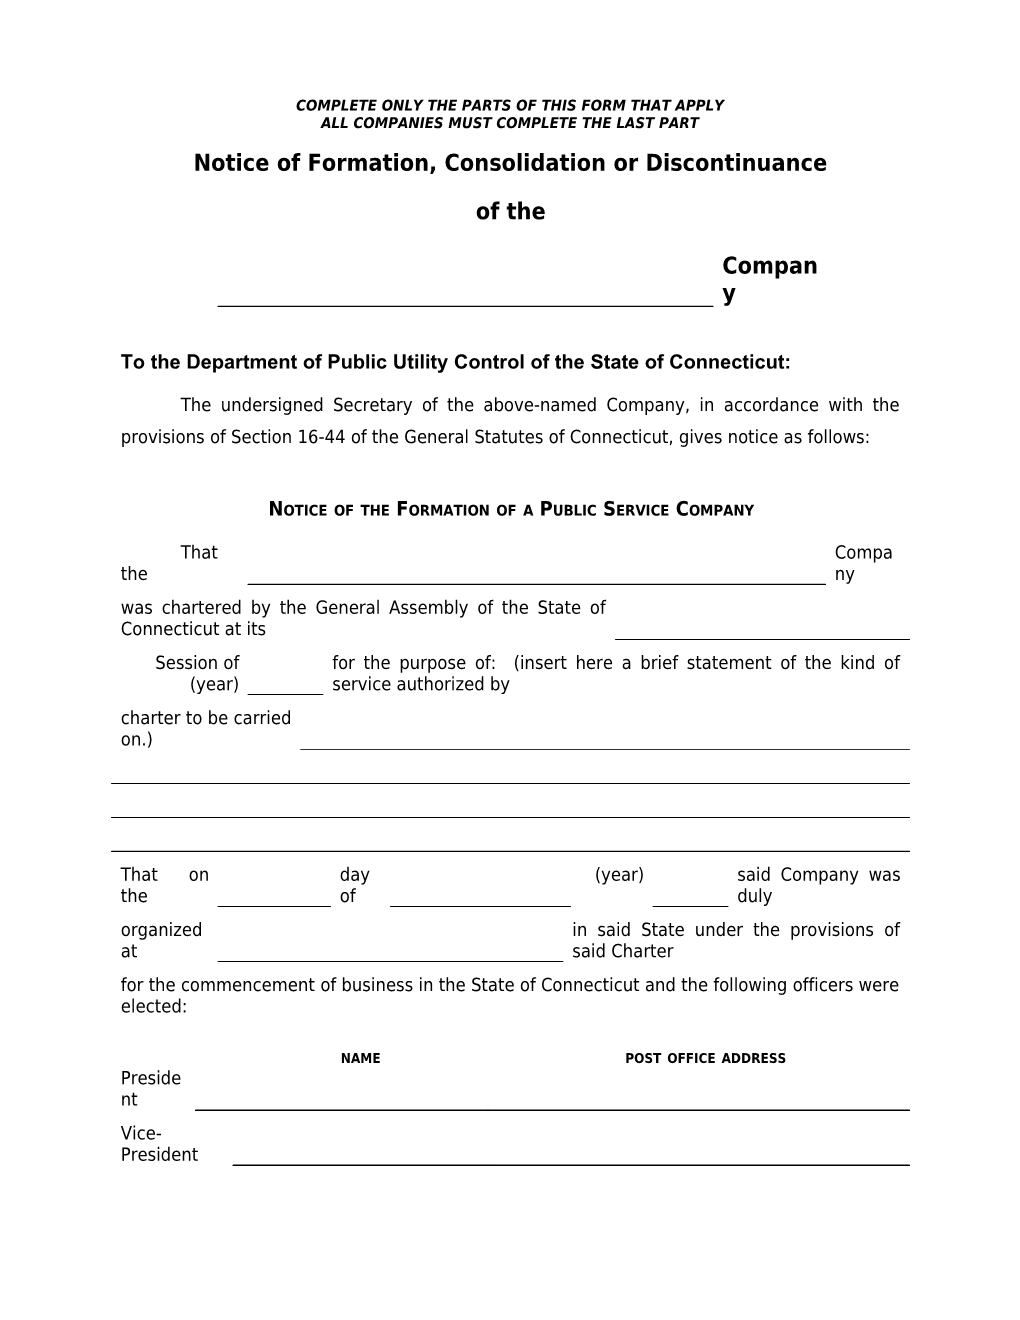 Notice of Formation, Consolidation, Discontinuance